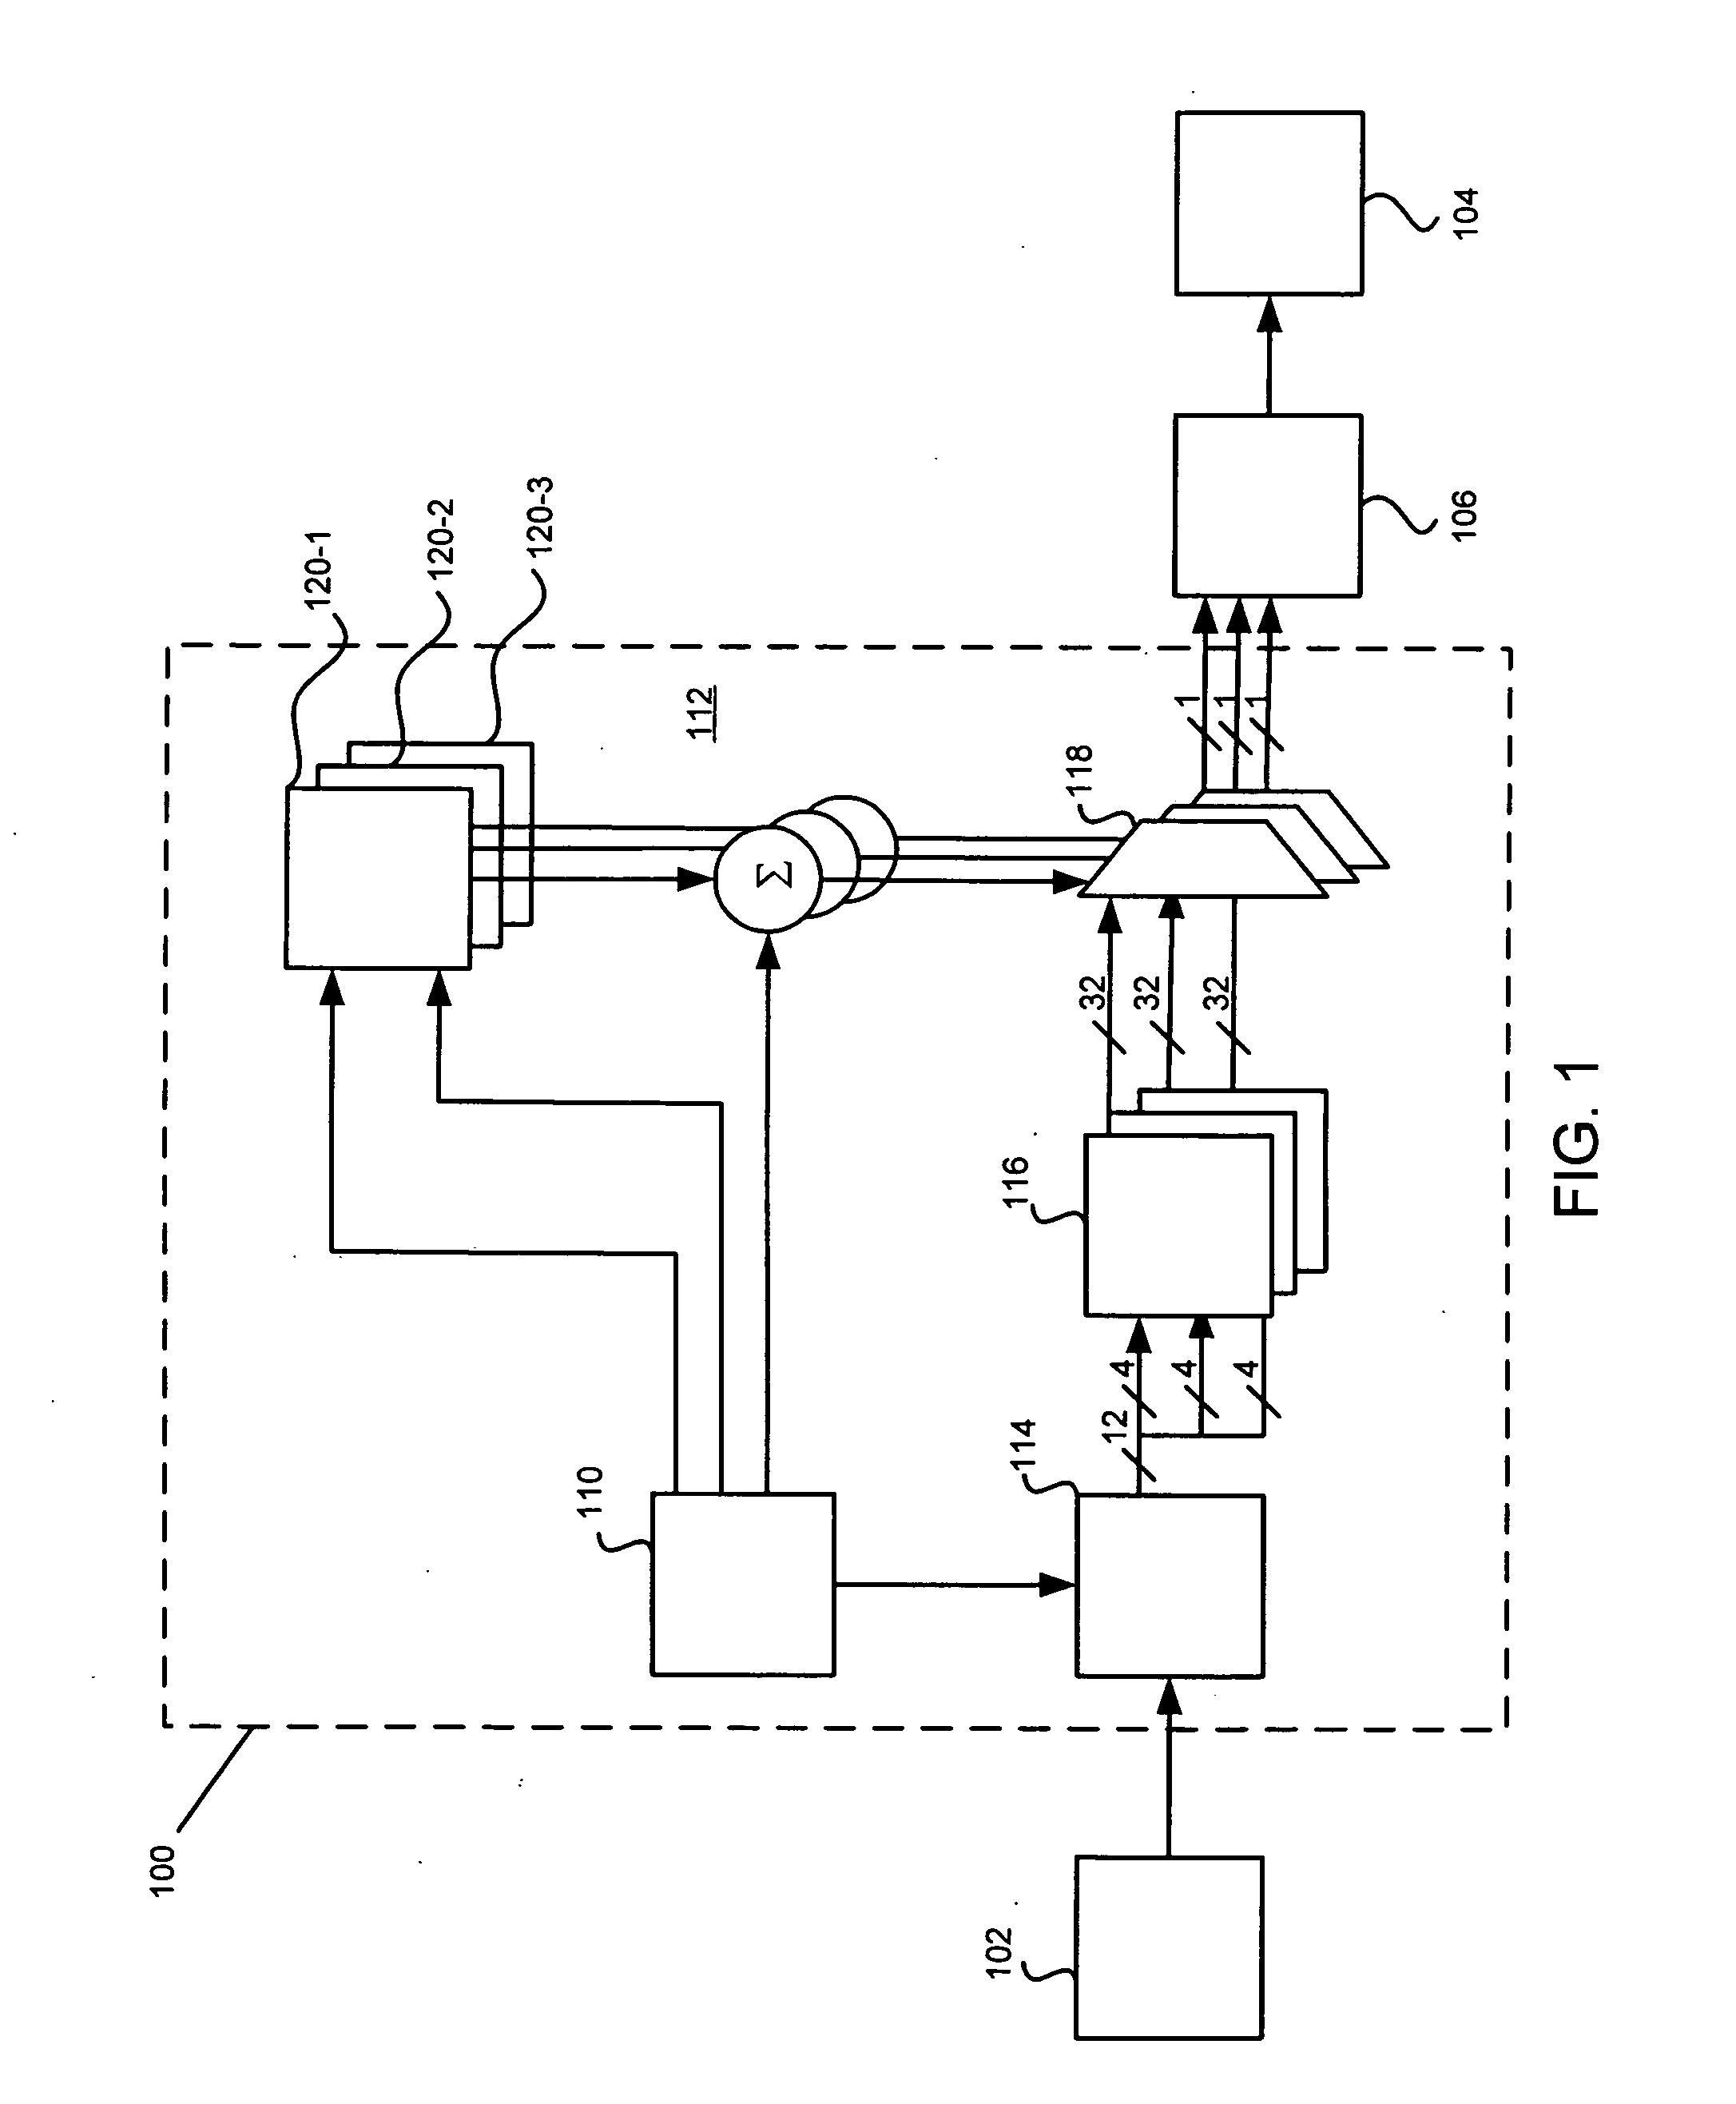 Frame rate control systems and methods